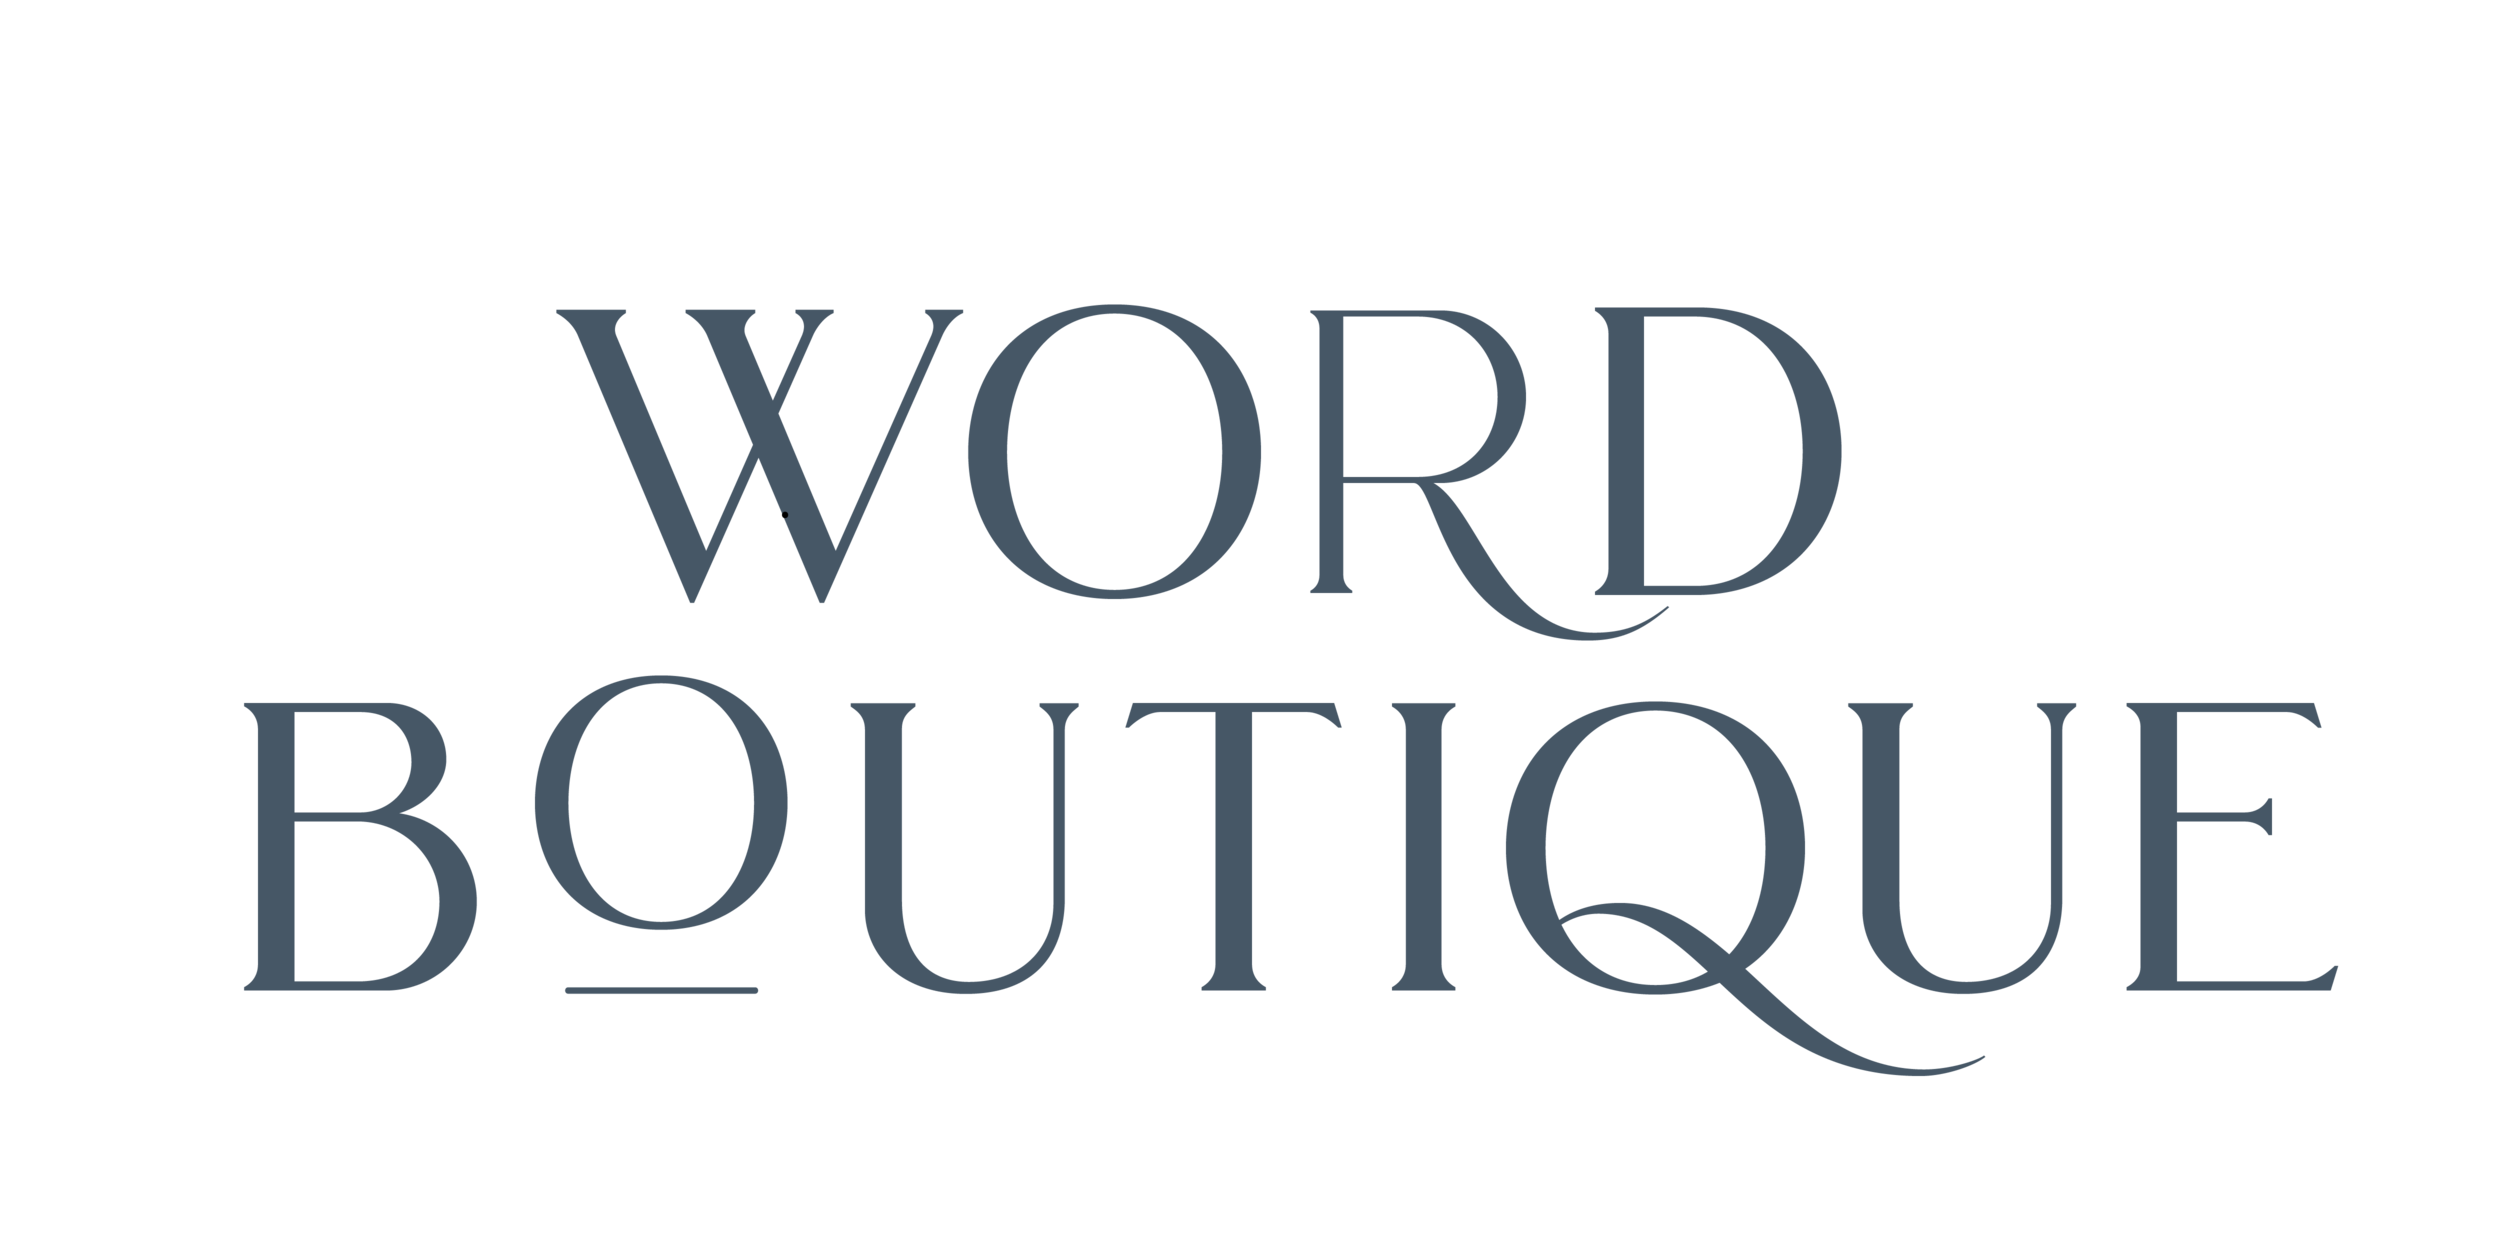 Word Boutique